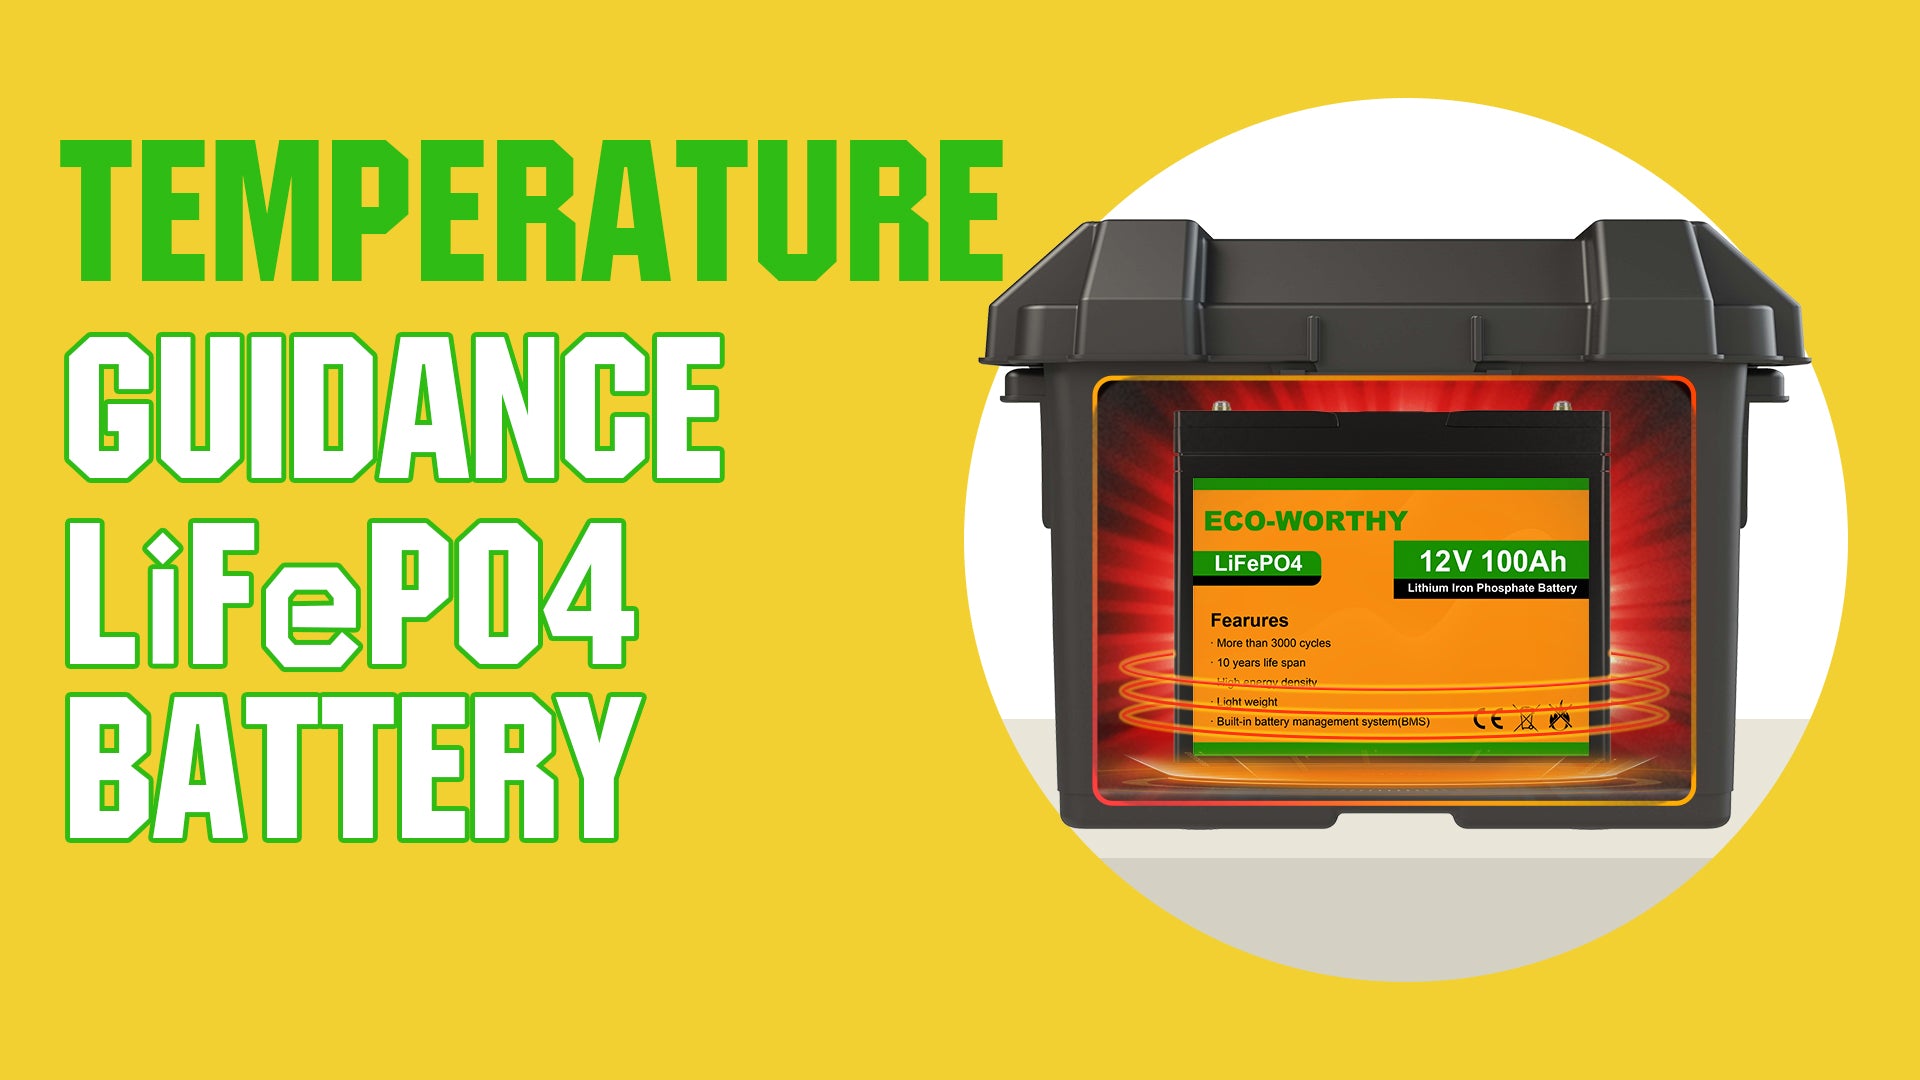 FAQ about Eco-worthy lithium battery working temperature and charging & discharging condition.